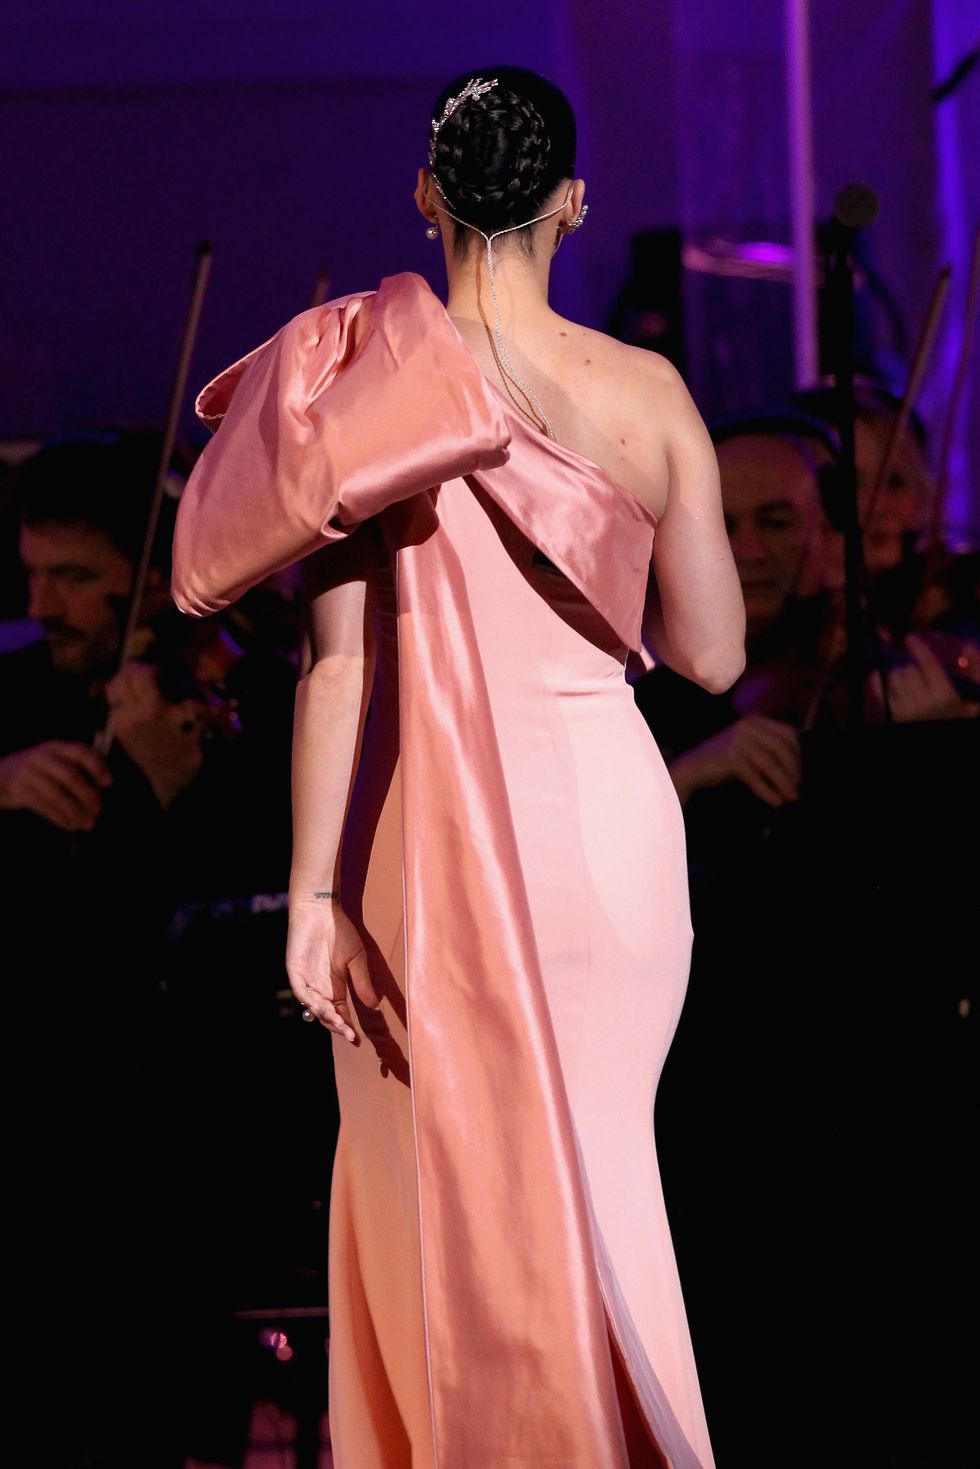 Katy Perry's pink bow dress from behind